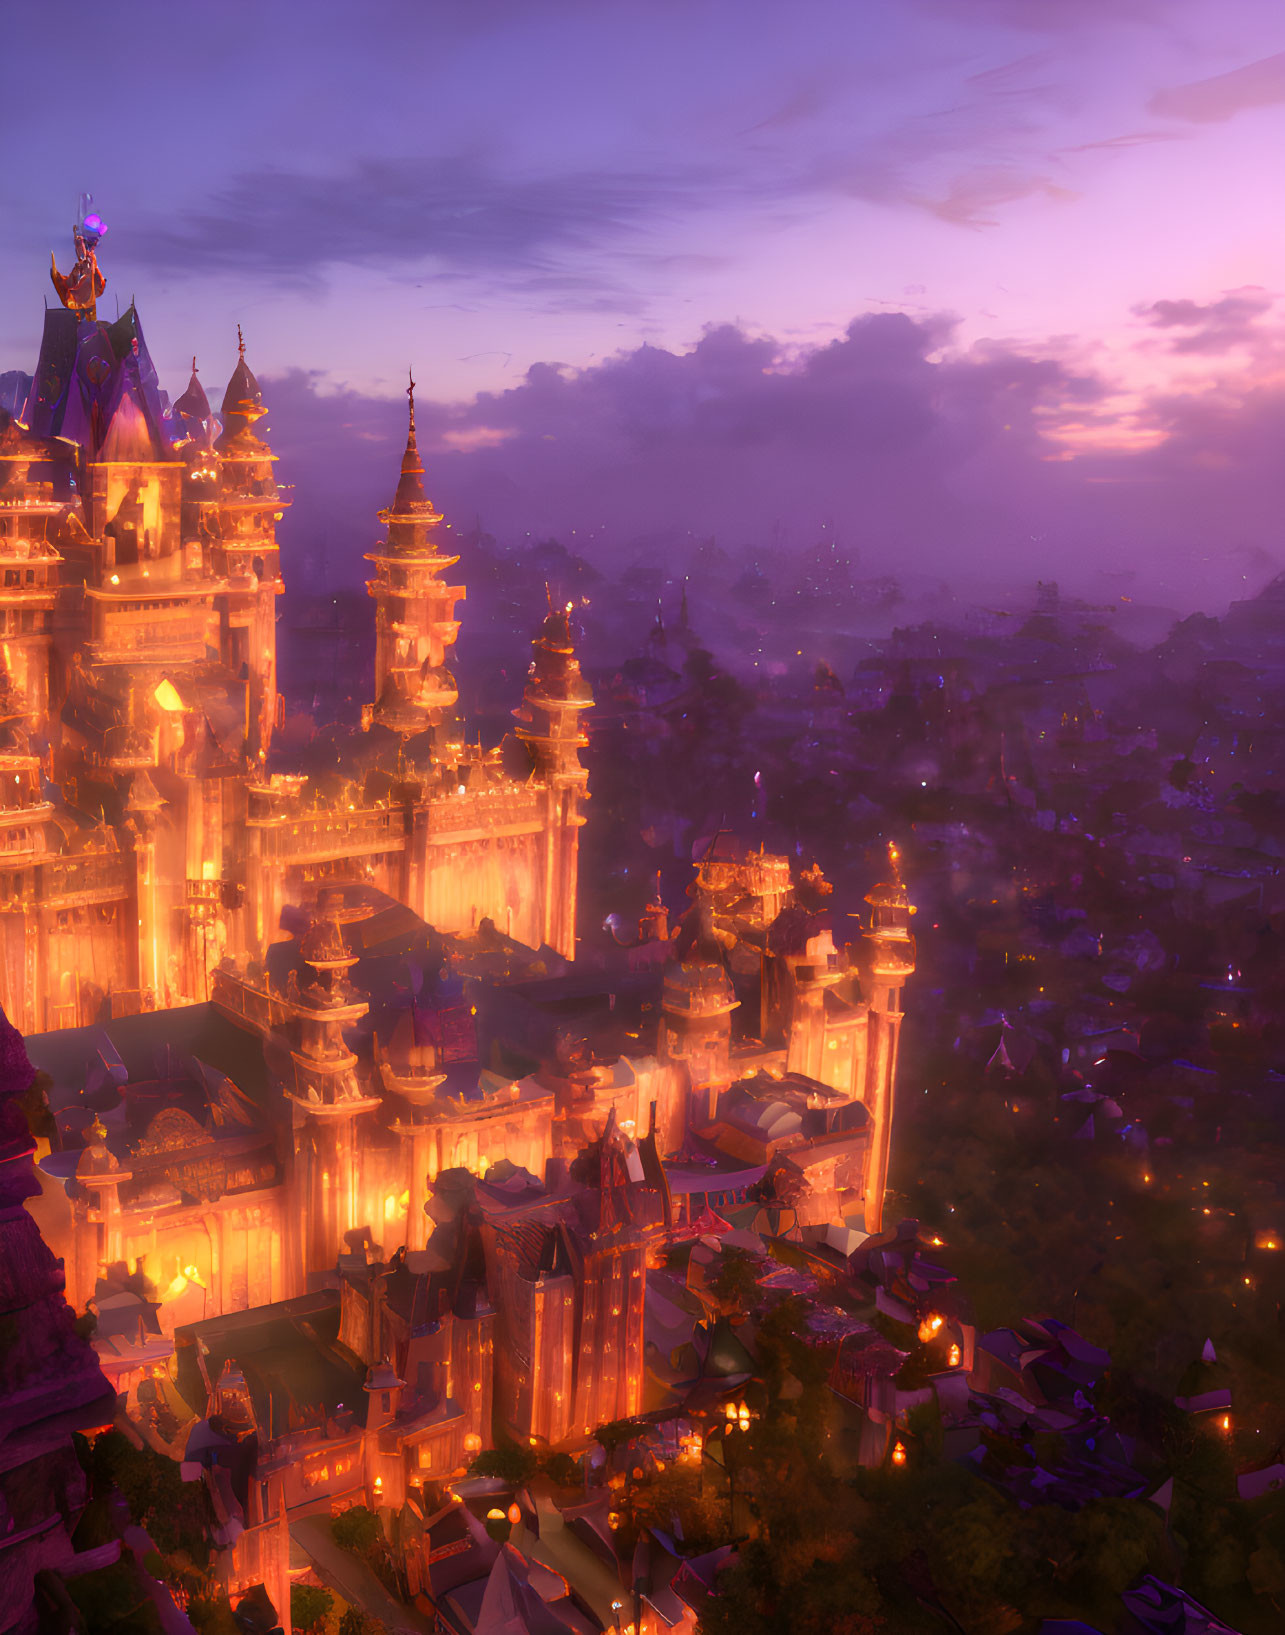 Fantasy castle with illuminated spires above cityscape at sunset